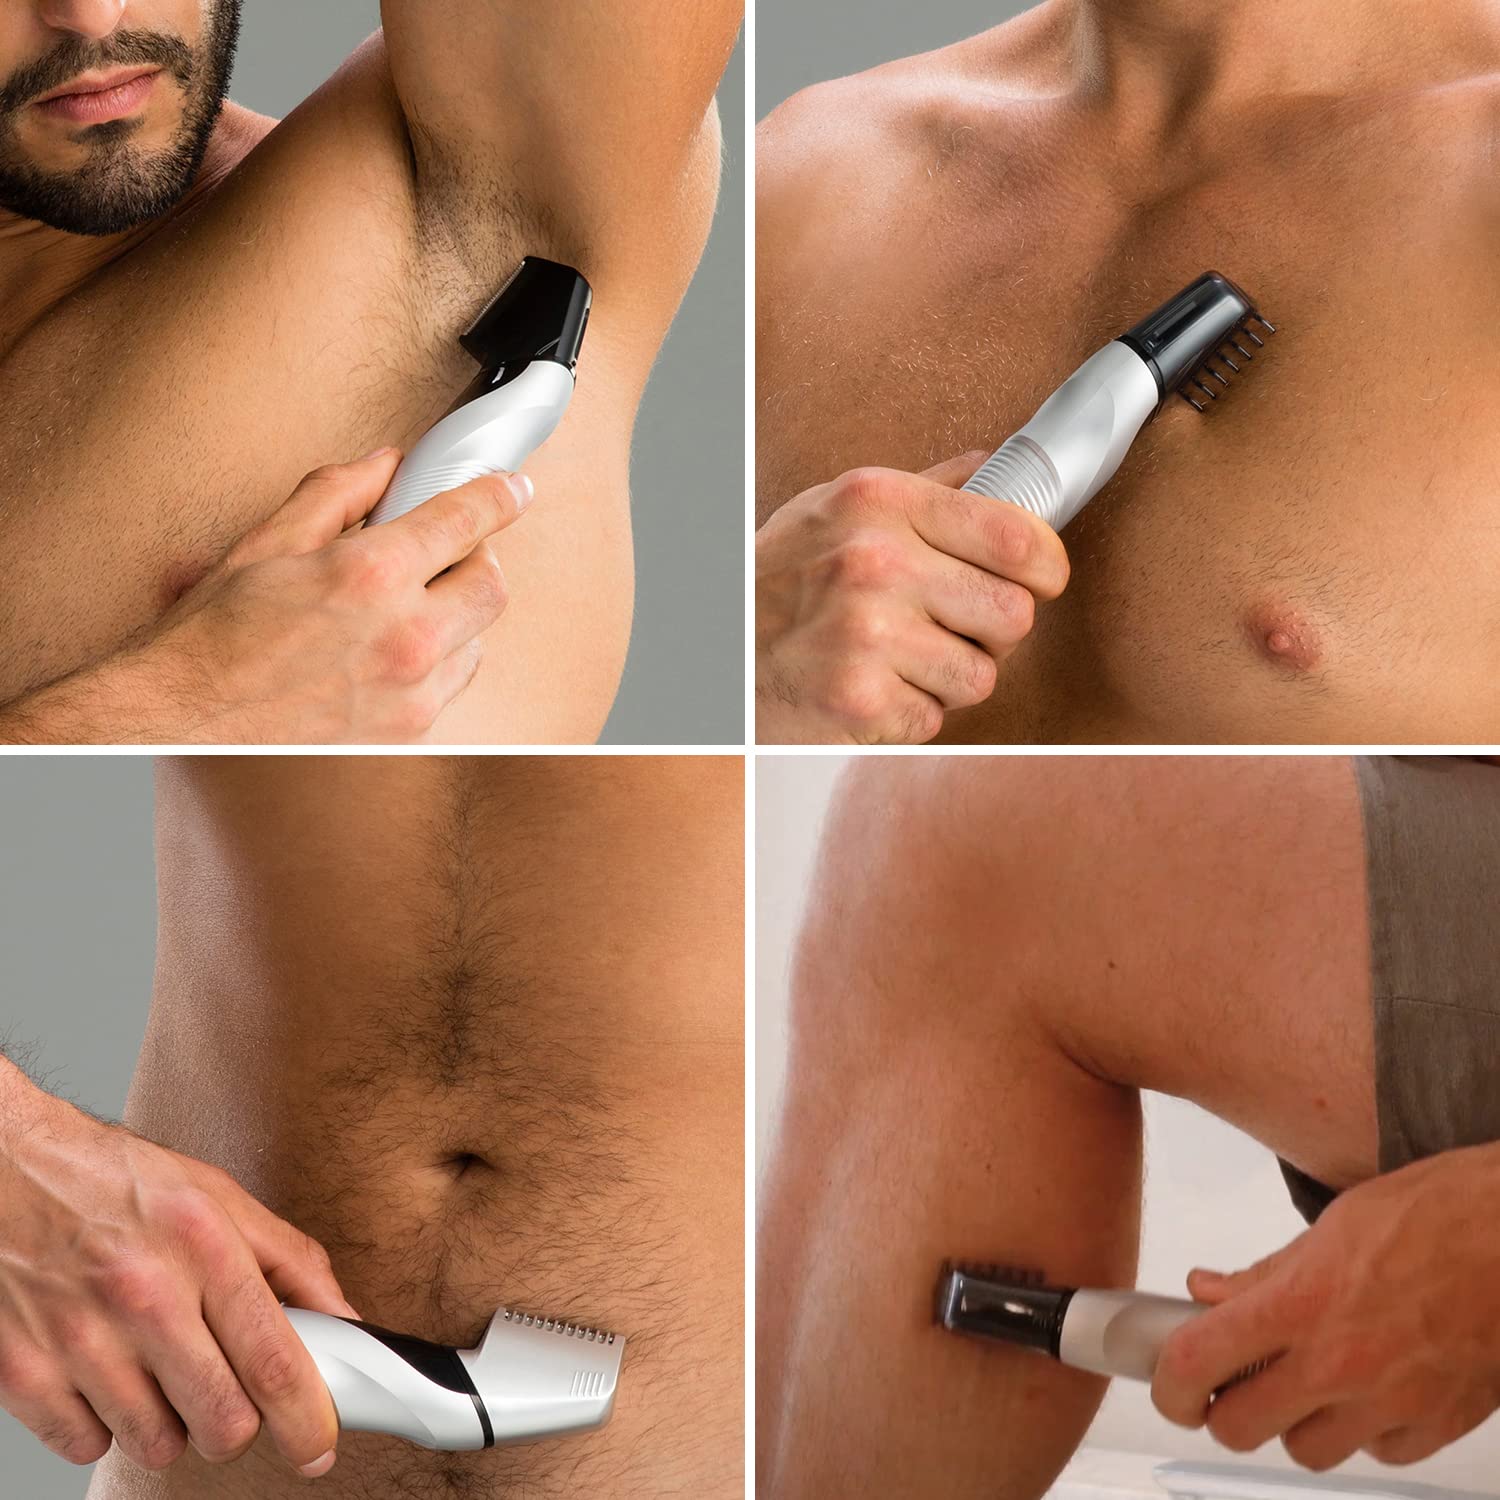 Panasonic Body Hair Trimmer for Men, Cordless Waterproof Design, V-Shaped Trimmer Head with 3 Comb Attachments for Gentle, Full Body Grooming, ER-GK60-S (Silver) : Beauty & Personal Care